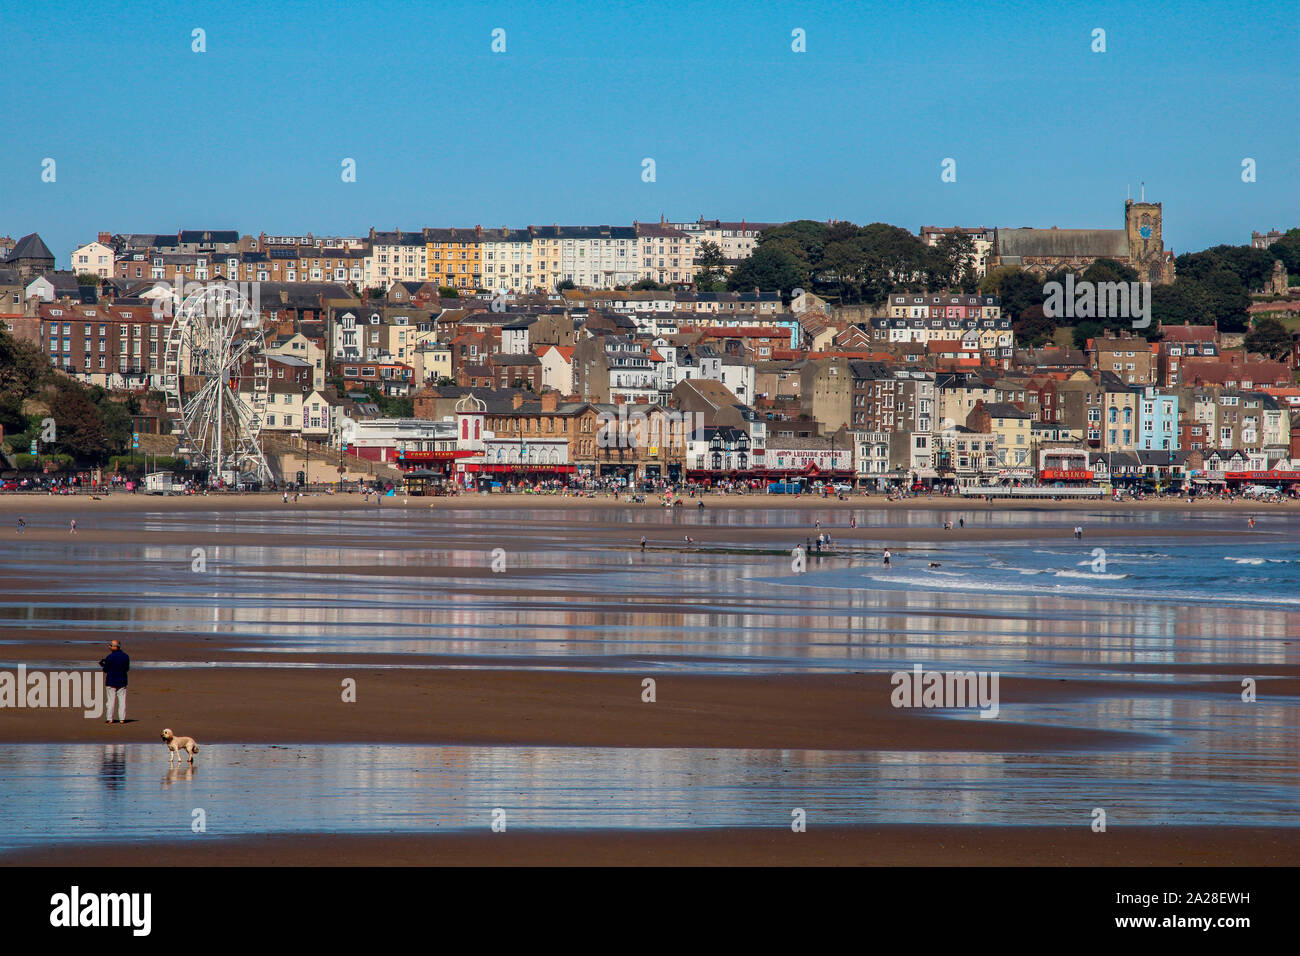 Scarborough. United Kingdom. 09.19.19. The seaside resort of Scarborough on the North Yorkshire coast in the northeast of England. Stock Photo